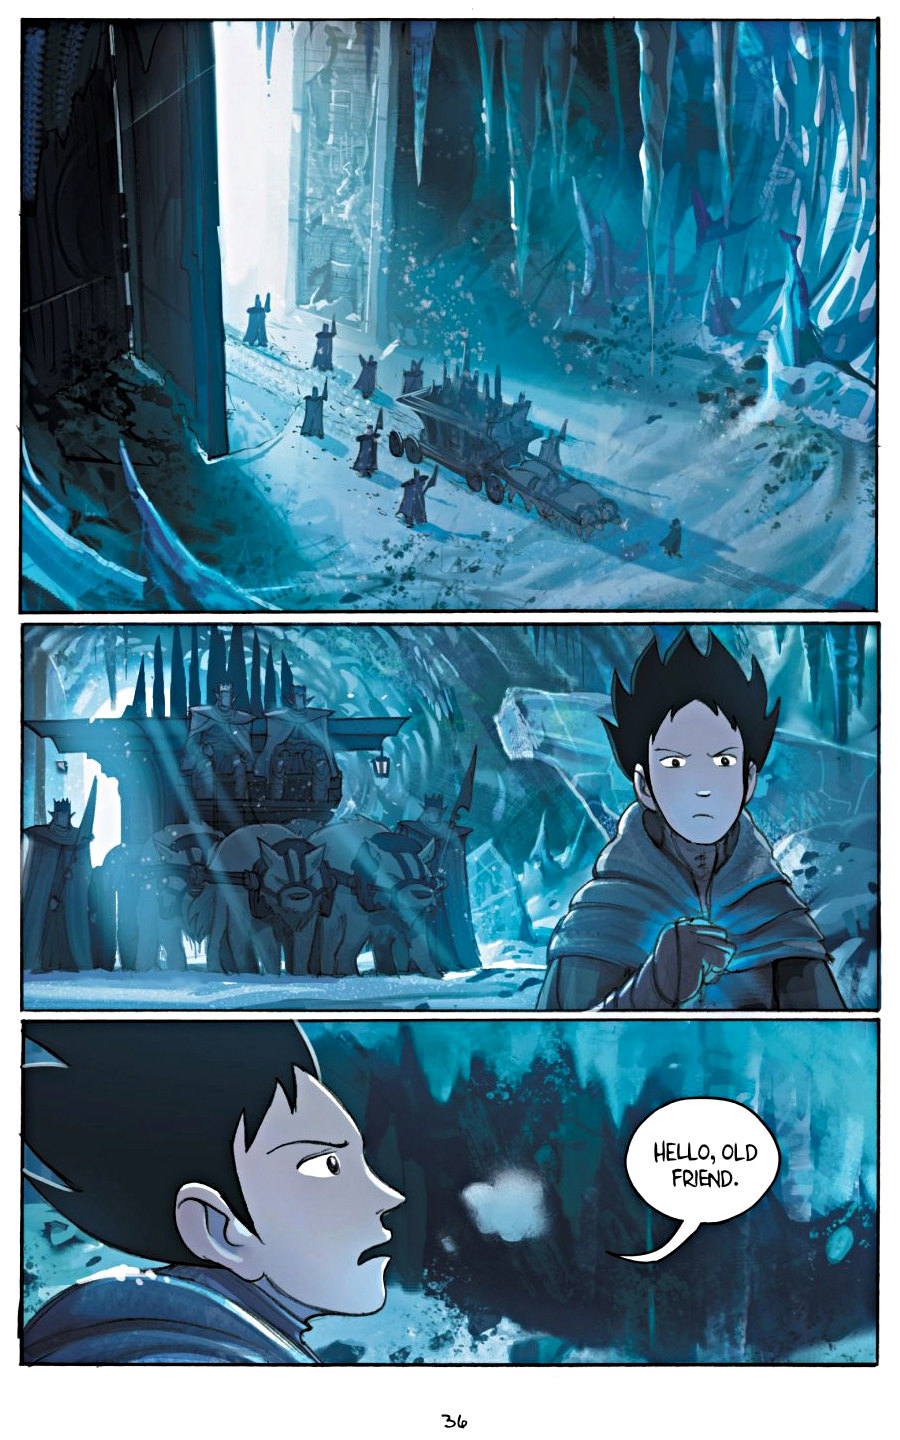 page 36 of amulet 5 prince of the elves graphic novel